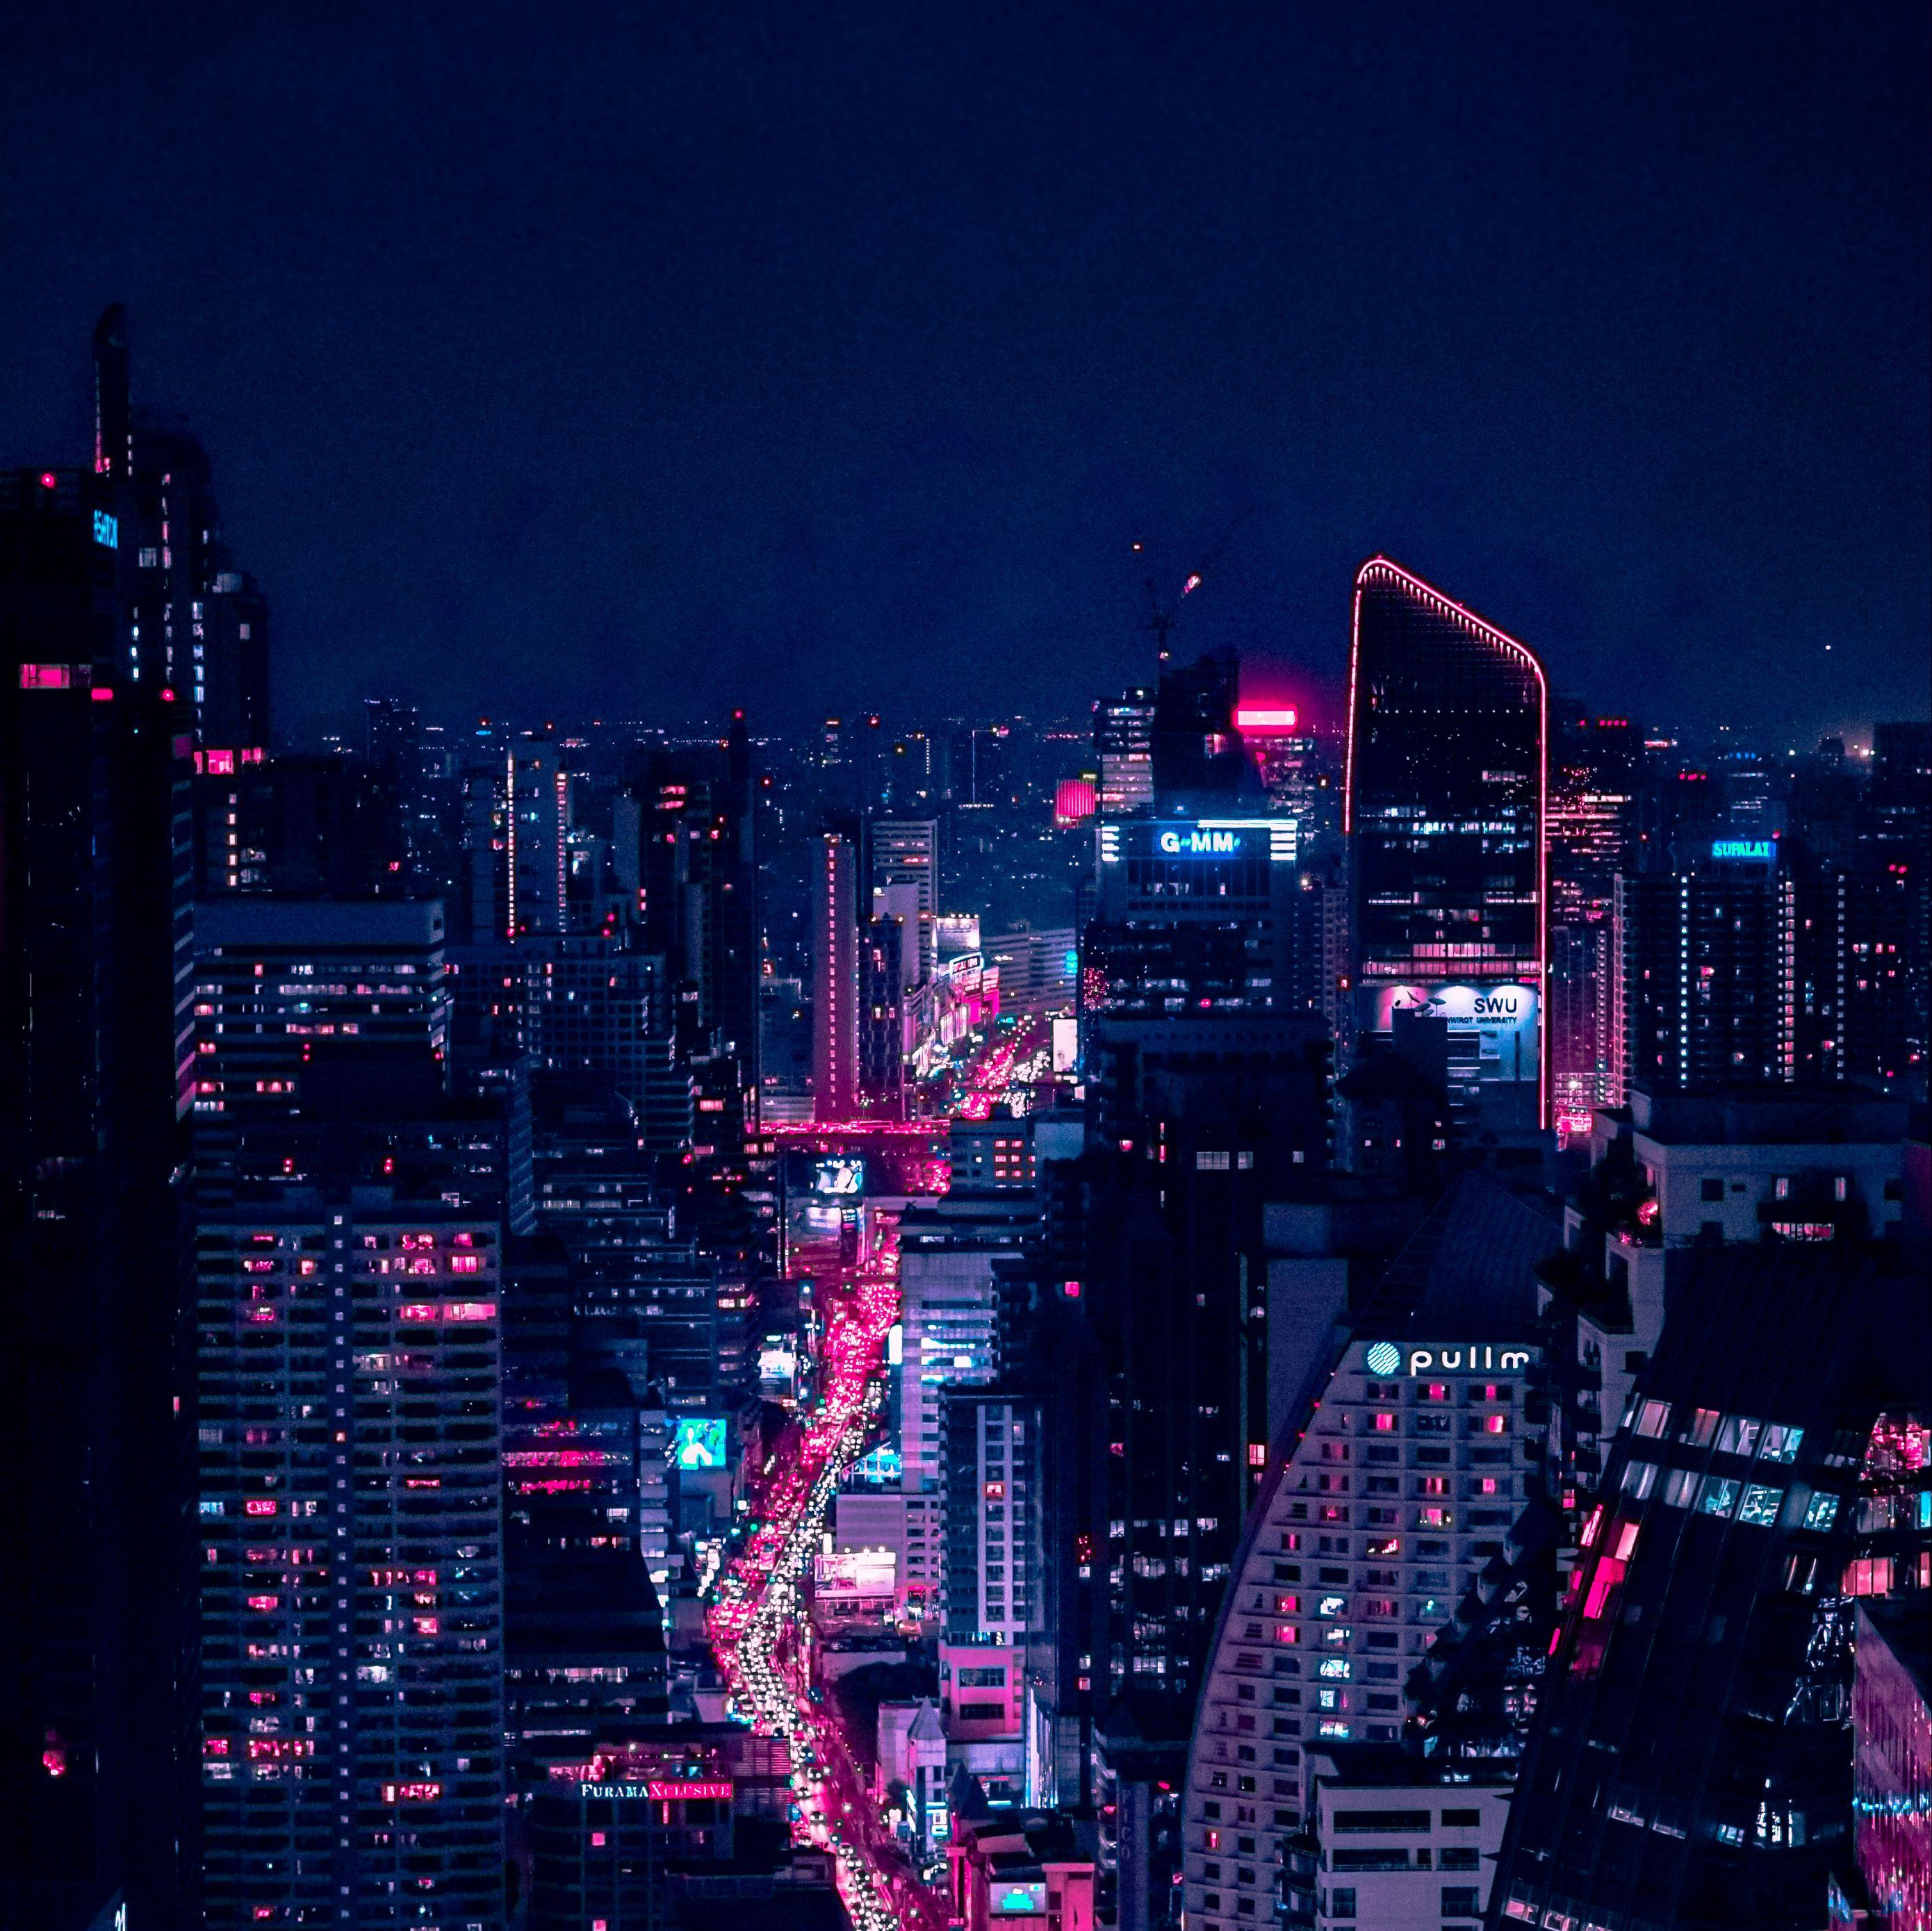 Download wallpaper 2780x2780 night city city lights aerial view